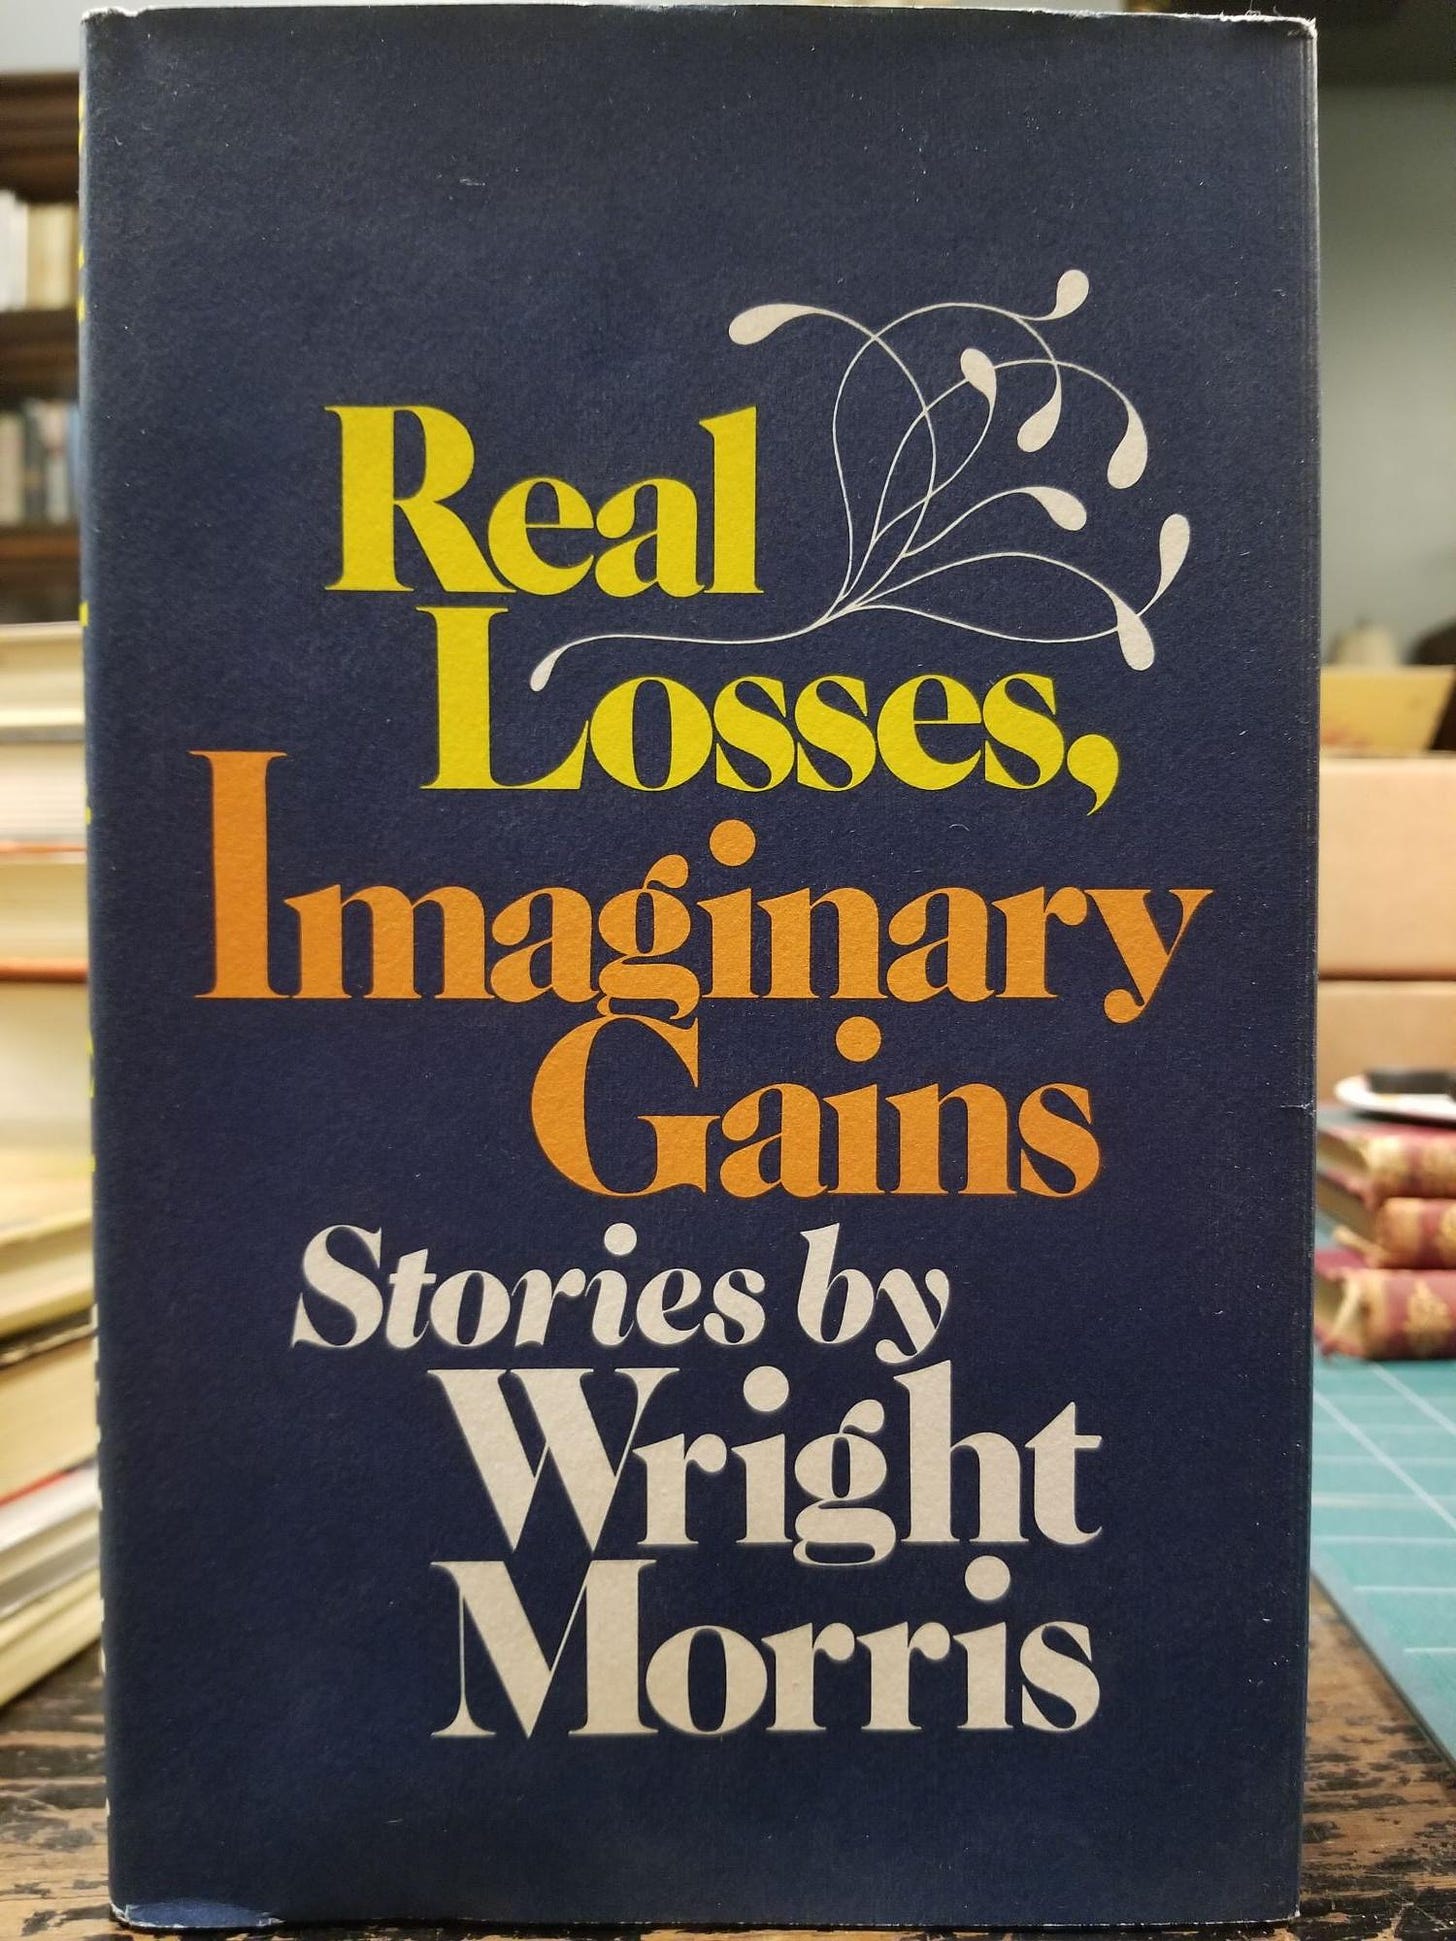 Basically pristine cover of Real Losses, Imaginary Gains by Wright Morris